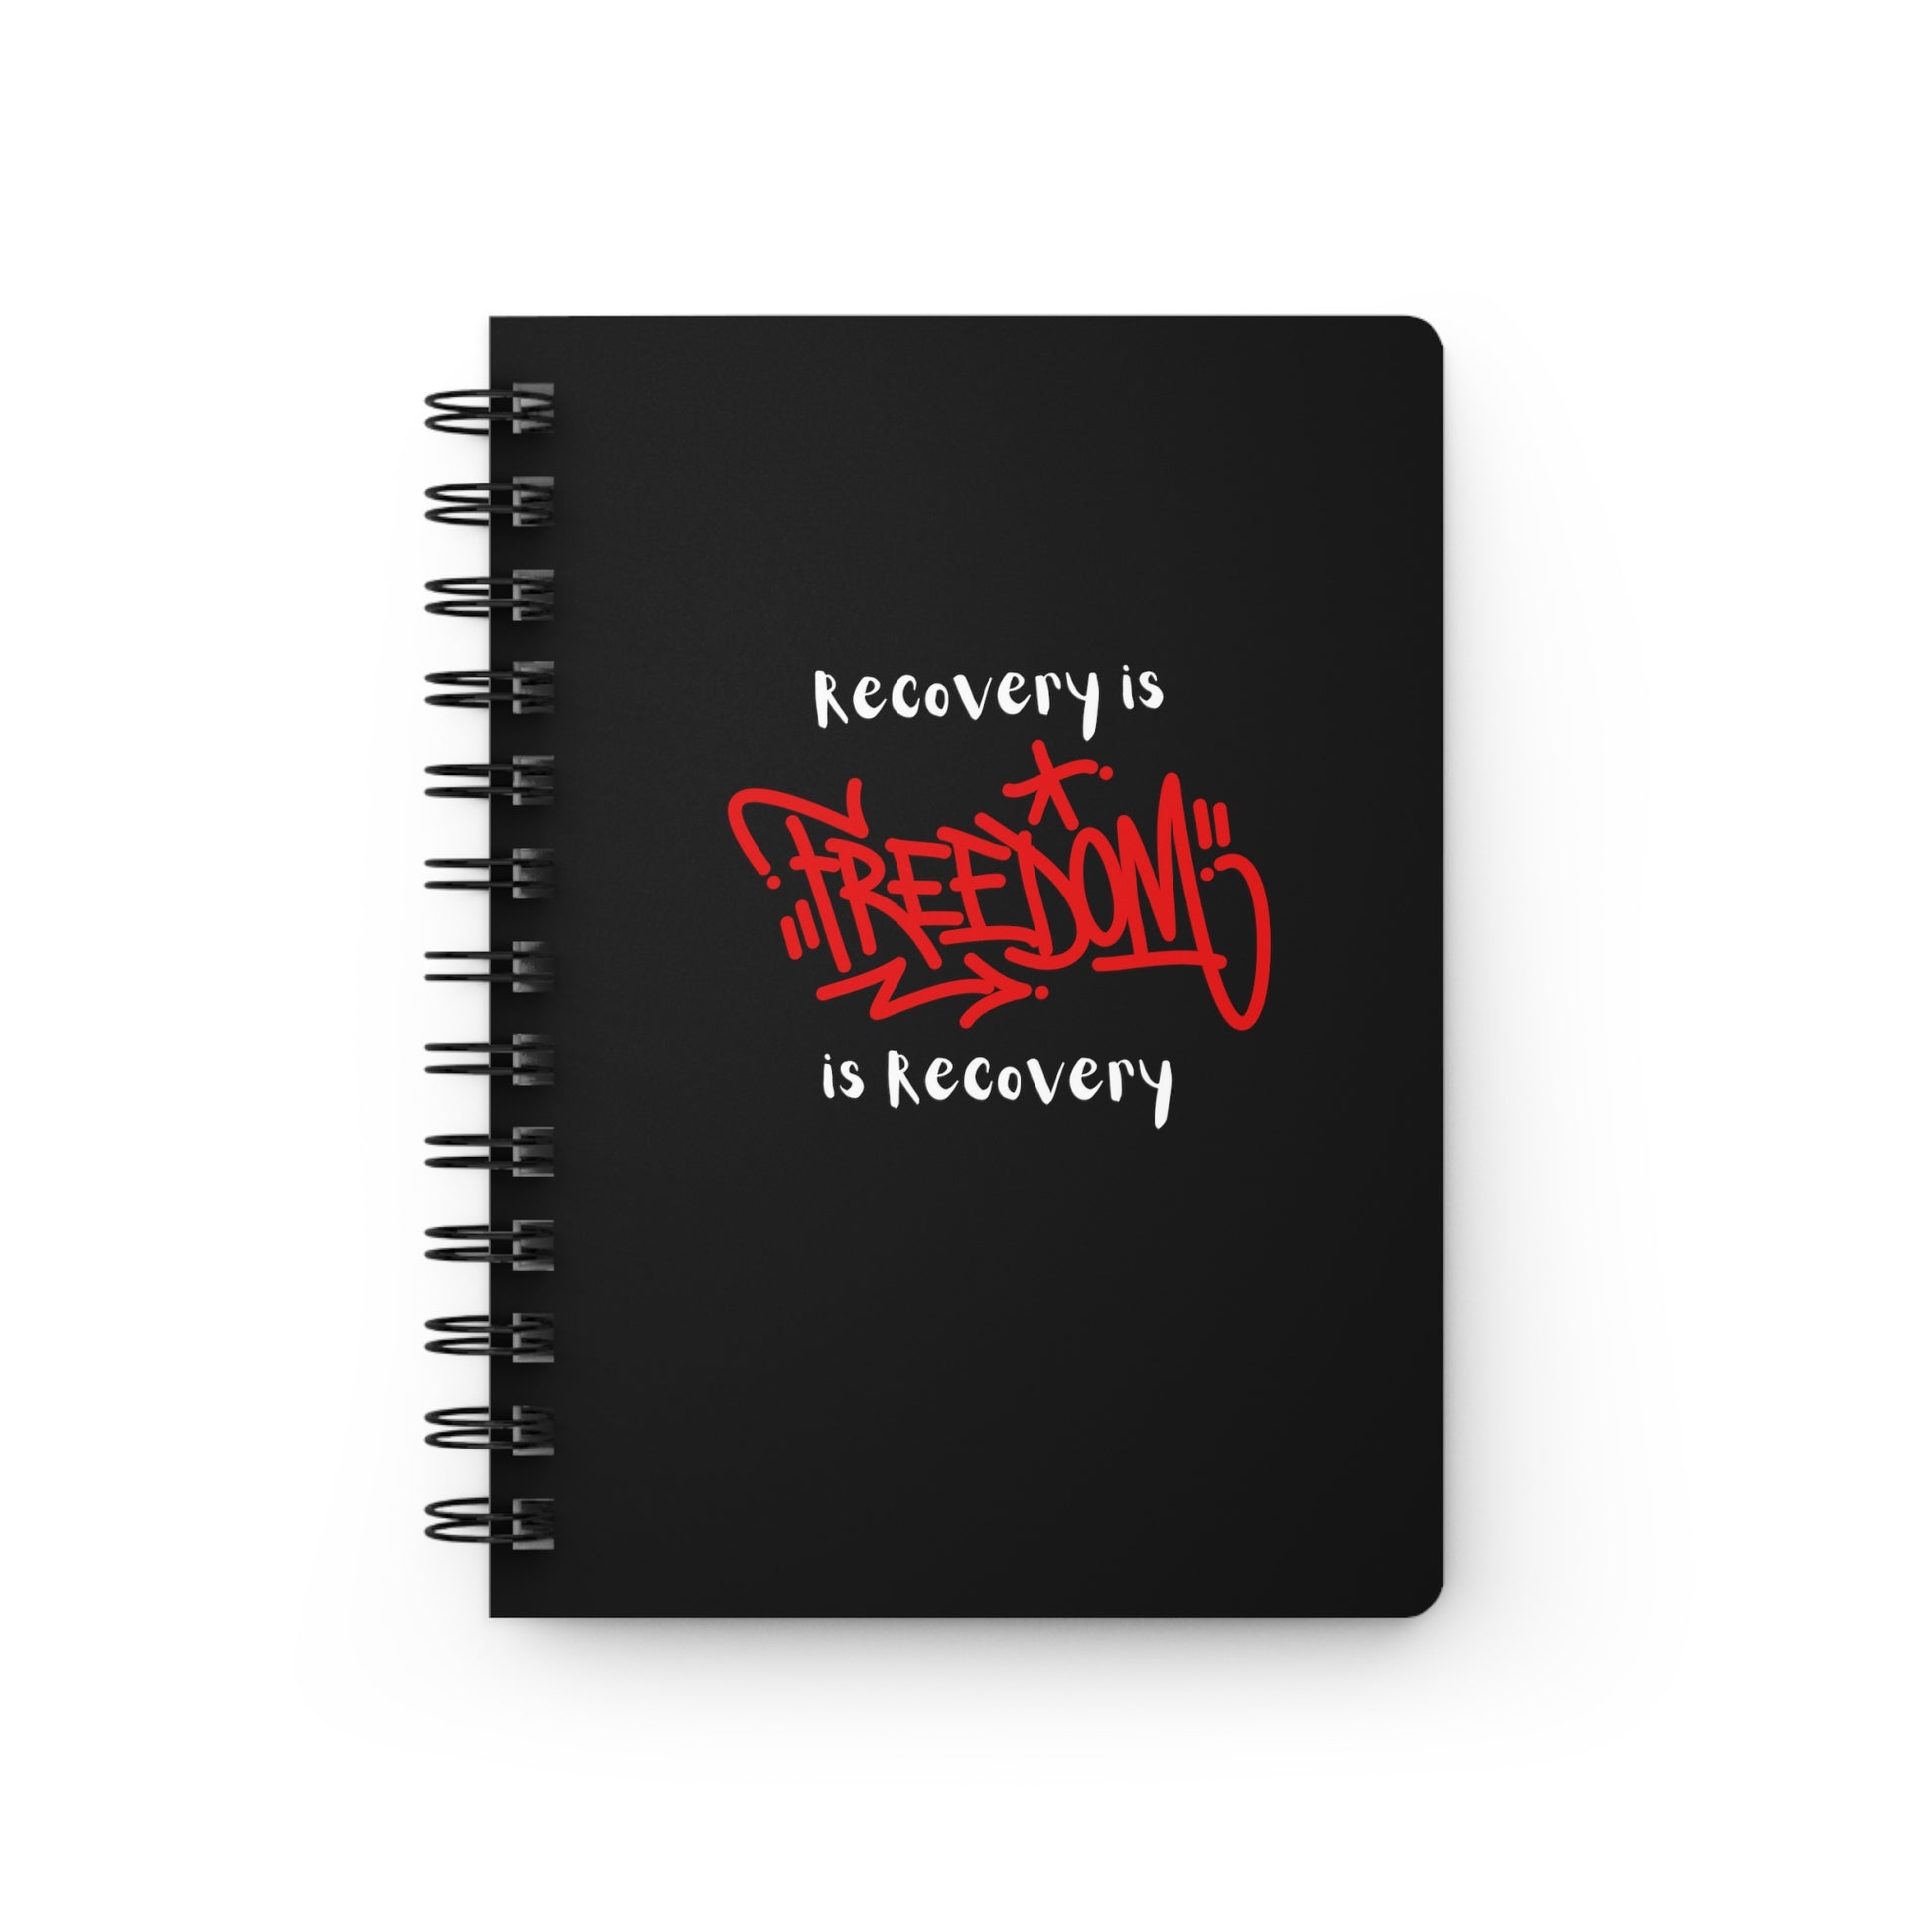 Recovery is FREEDOM  5x7 Journal from Saffy Baldwin at Celebrate Sobriety Gifts.com